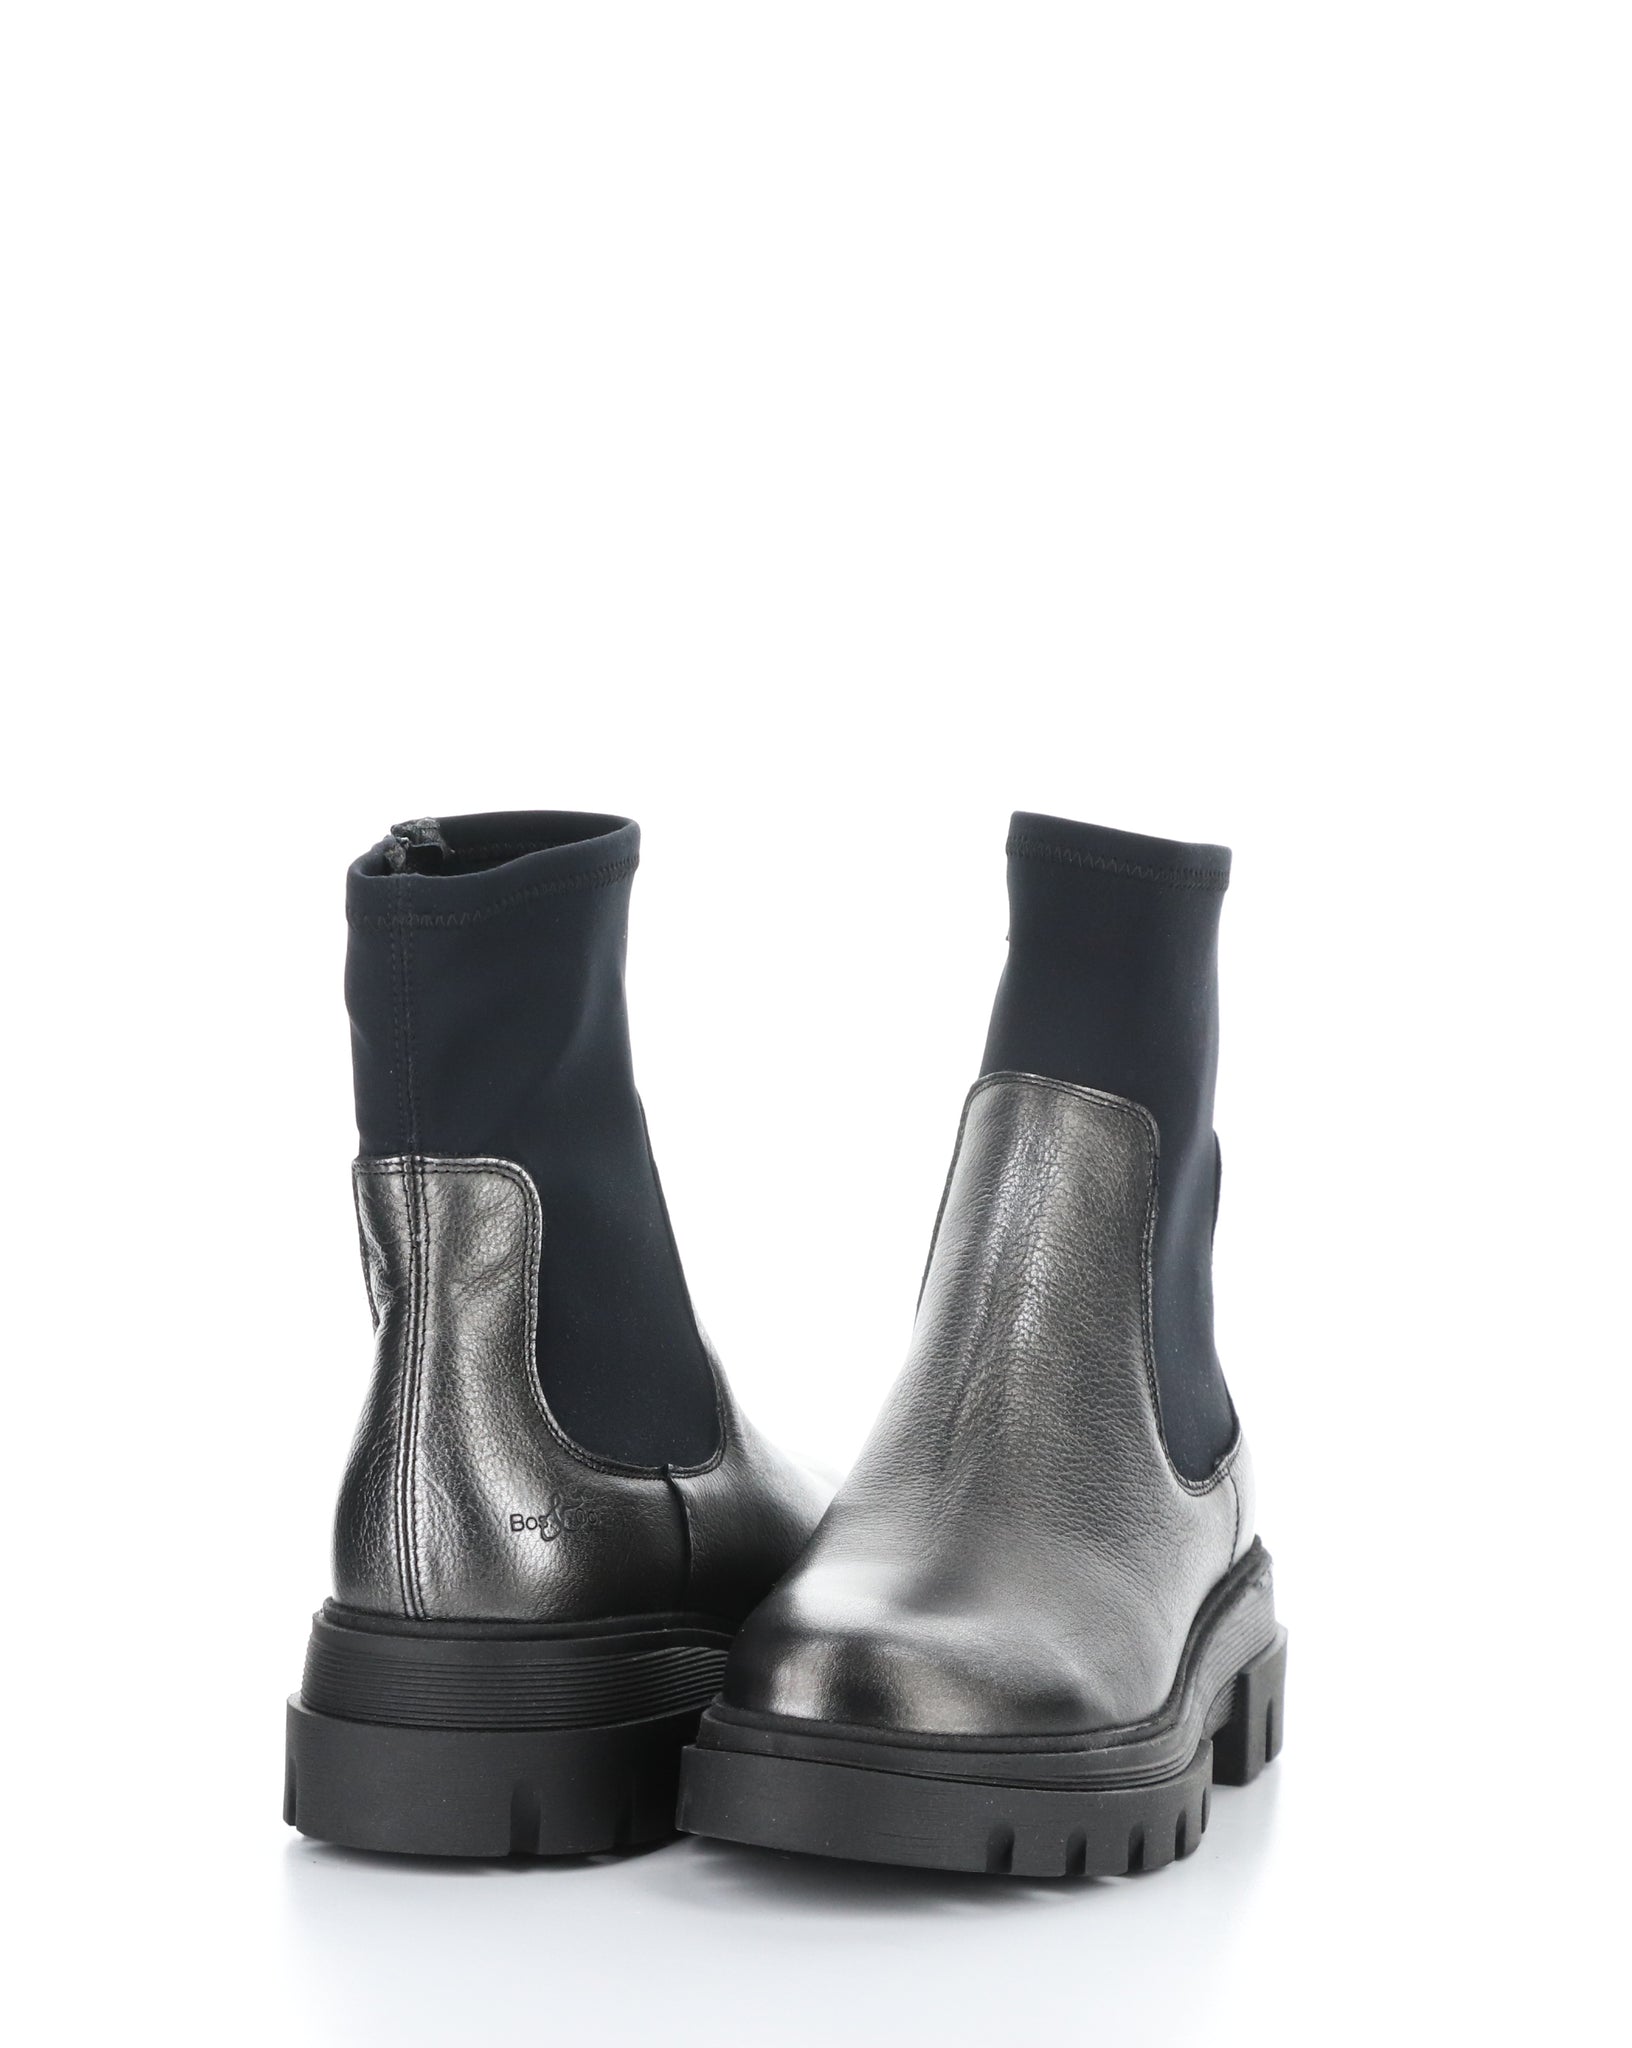 Bos&Co. "Five" Steel/Black- Ankle Boot